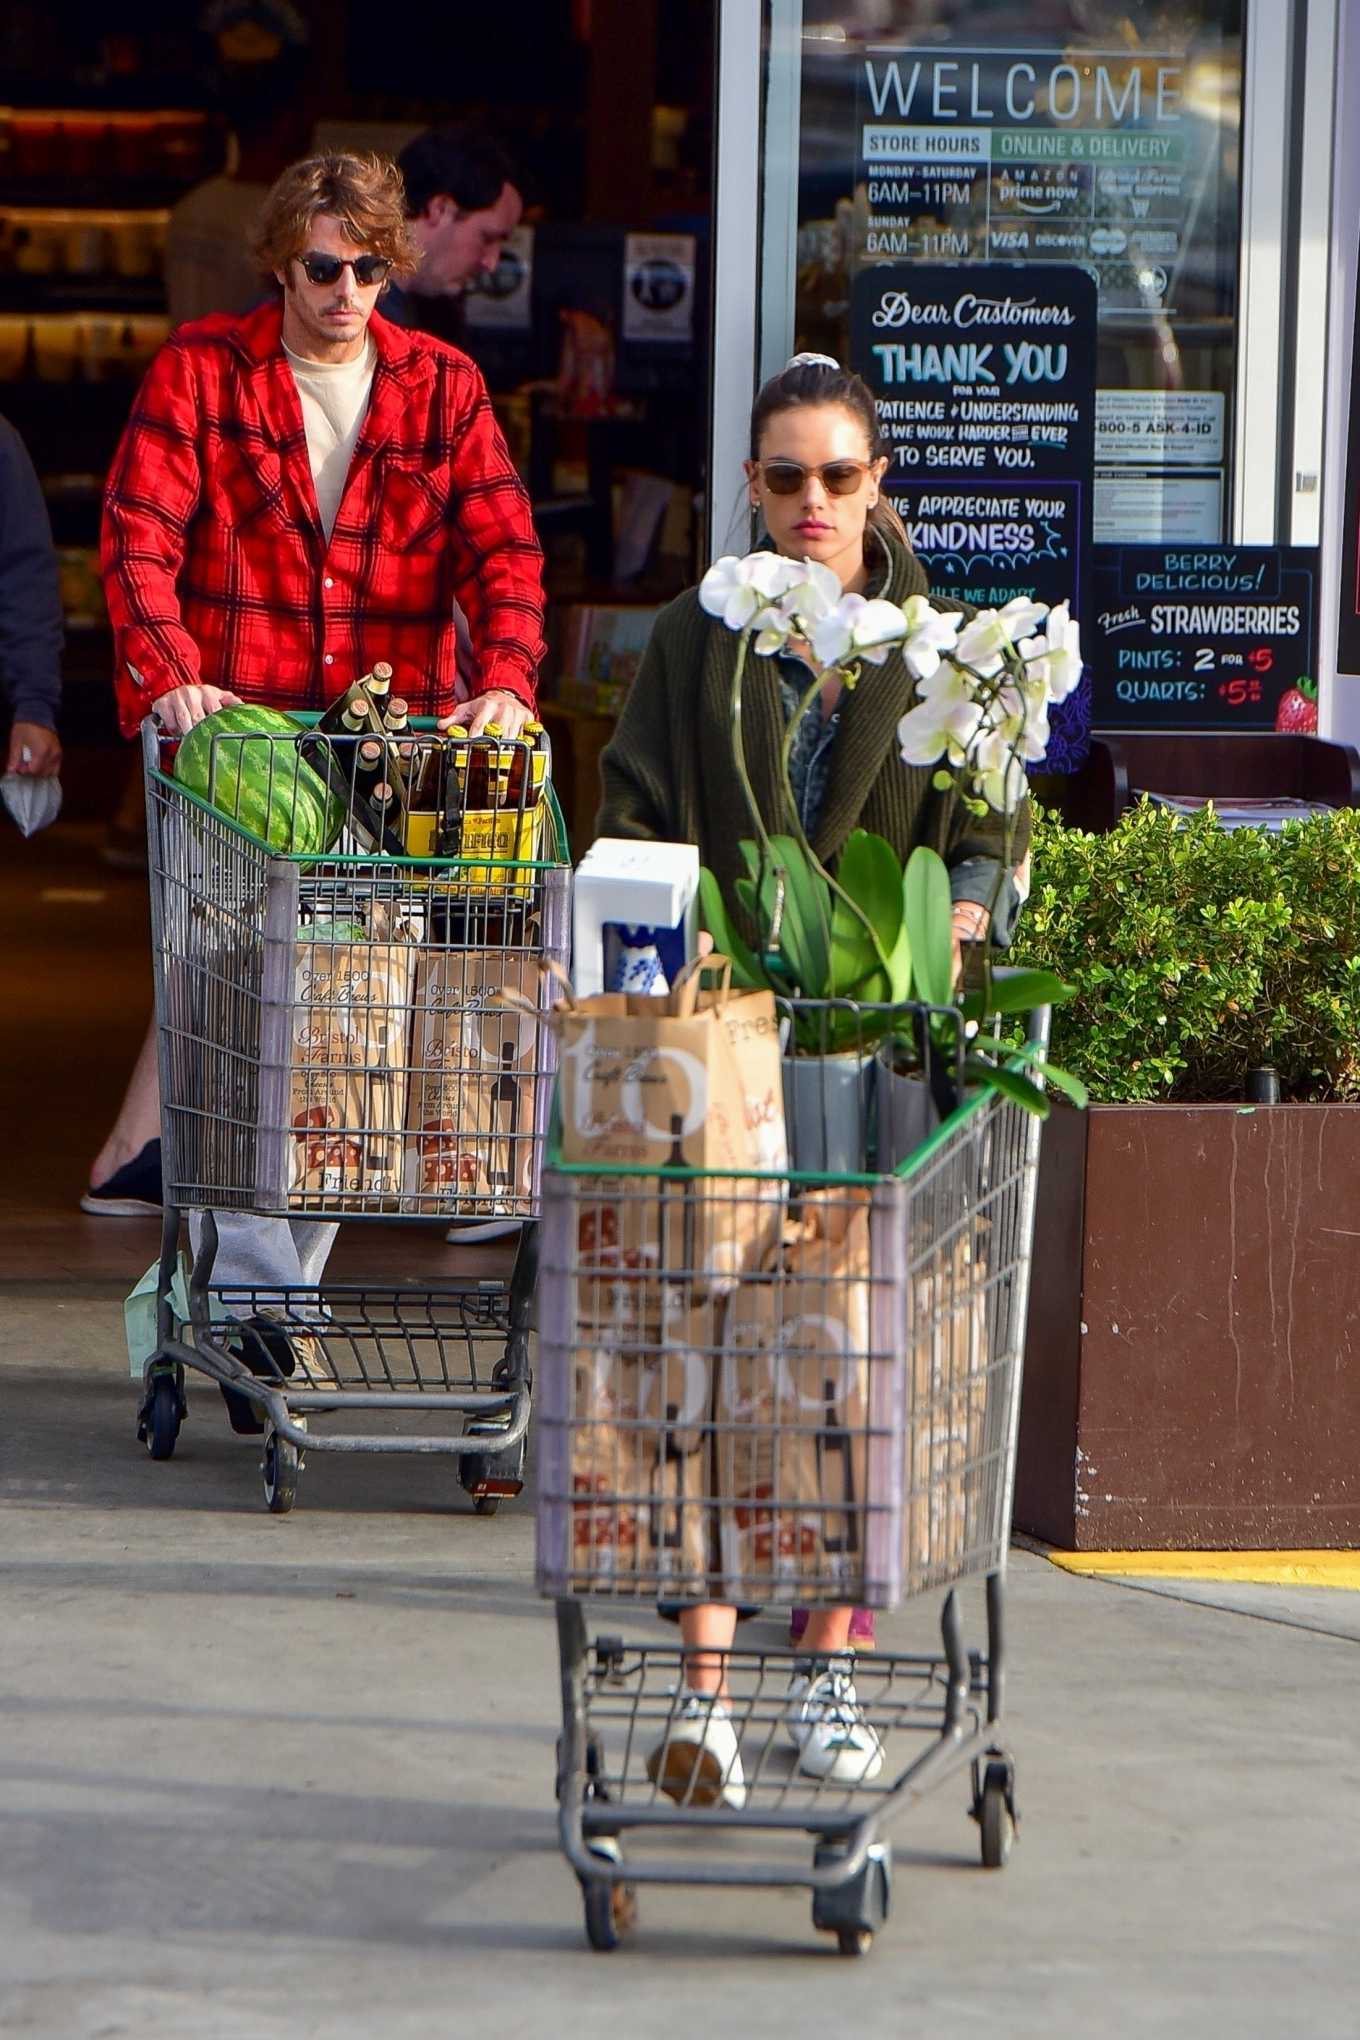 Alessandra Ambrosio â€“ Grocery shopping during â€˜Stay at homeâ€™ order in Santa Monica